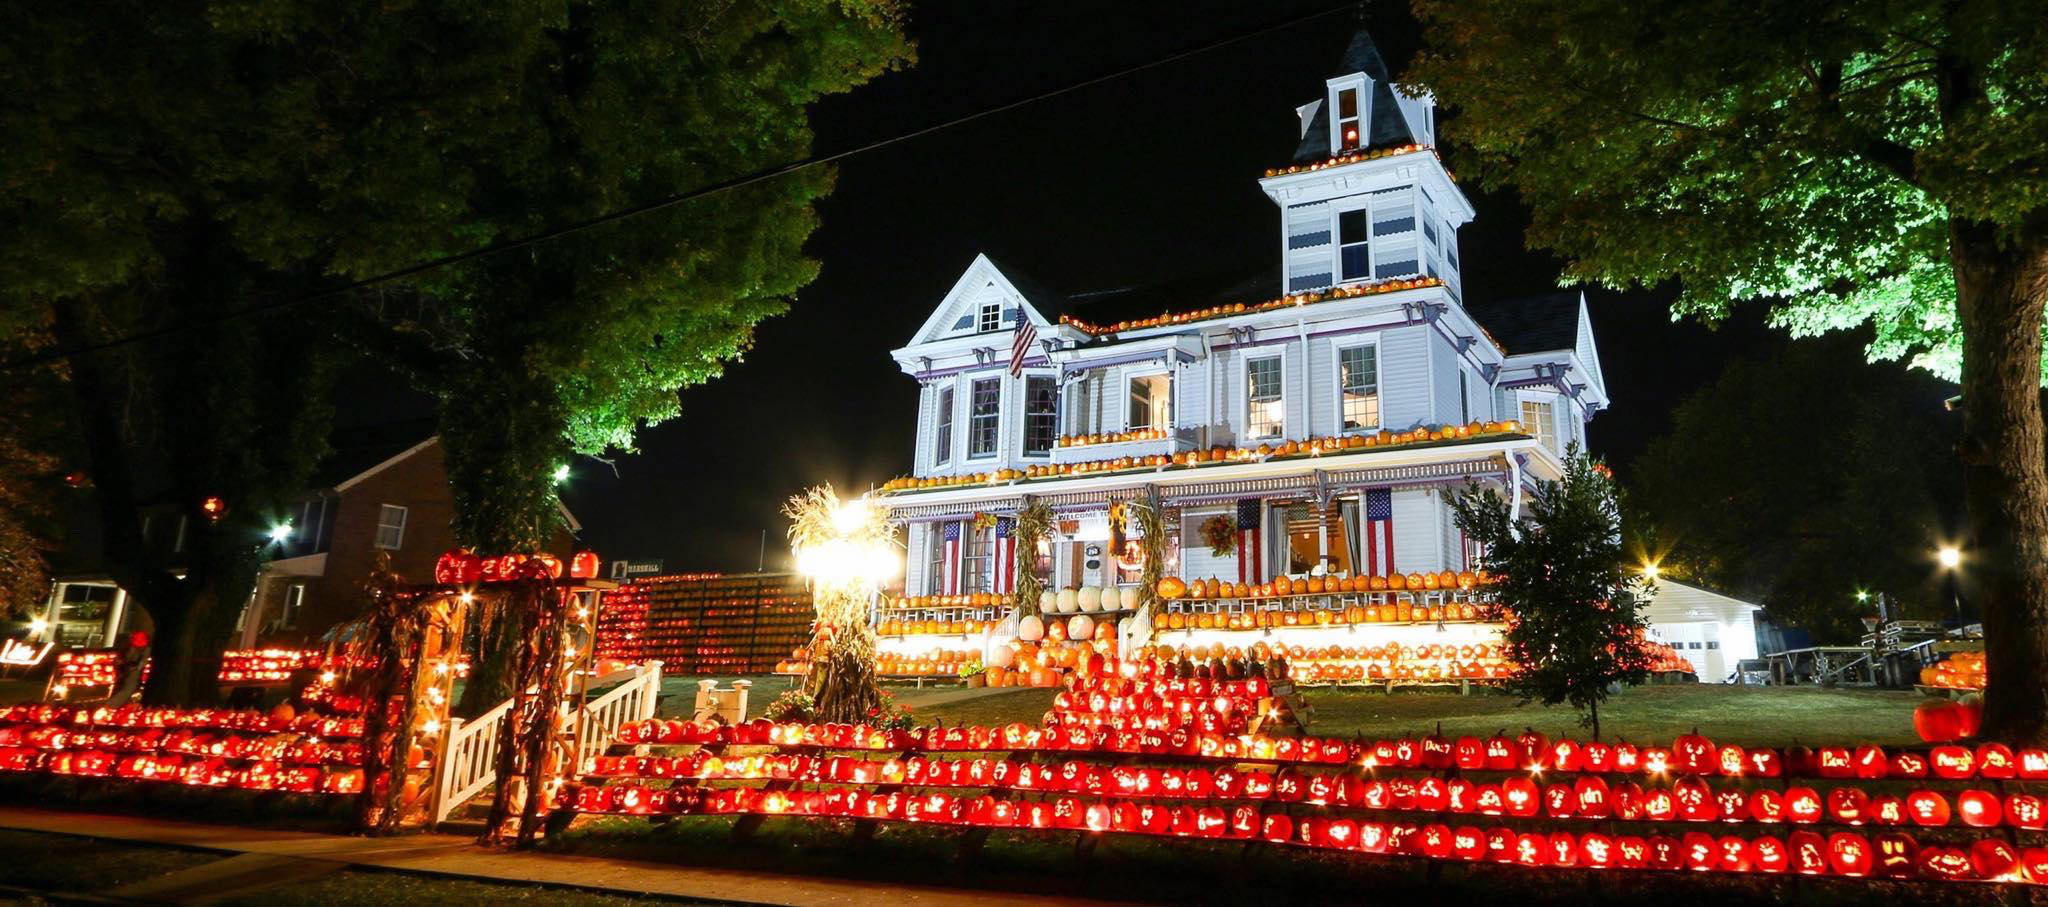 PHOTO: The Pumpkin House in West Virginia is decorated with 3,000 lit, hand-carved pumpkins for the annual C-K Autumn Fest.